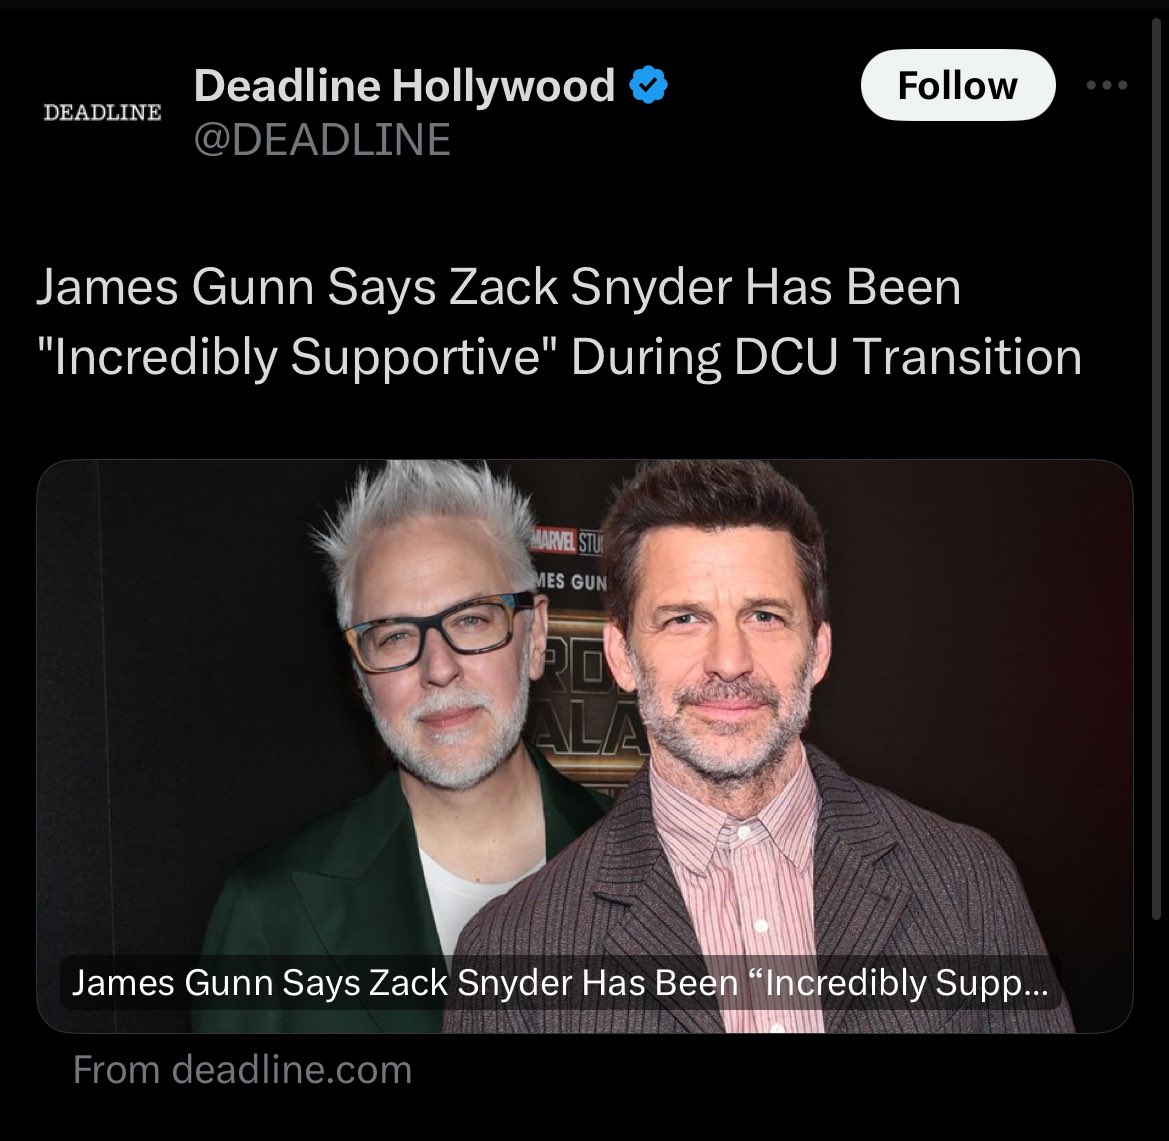 Conveniently timed PR. Why not be a good supportive filmmaker and fund his Justice League sequels as elseworlds. He’s literally a money magnet. Put the ego aside Jim. #RestoreTheSnyderVerse & #ReleaseTheAyerCut too, it’s just good business.